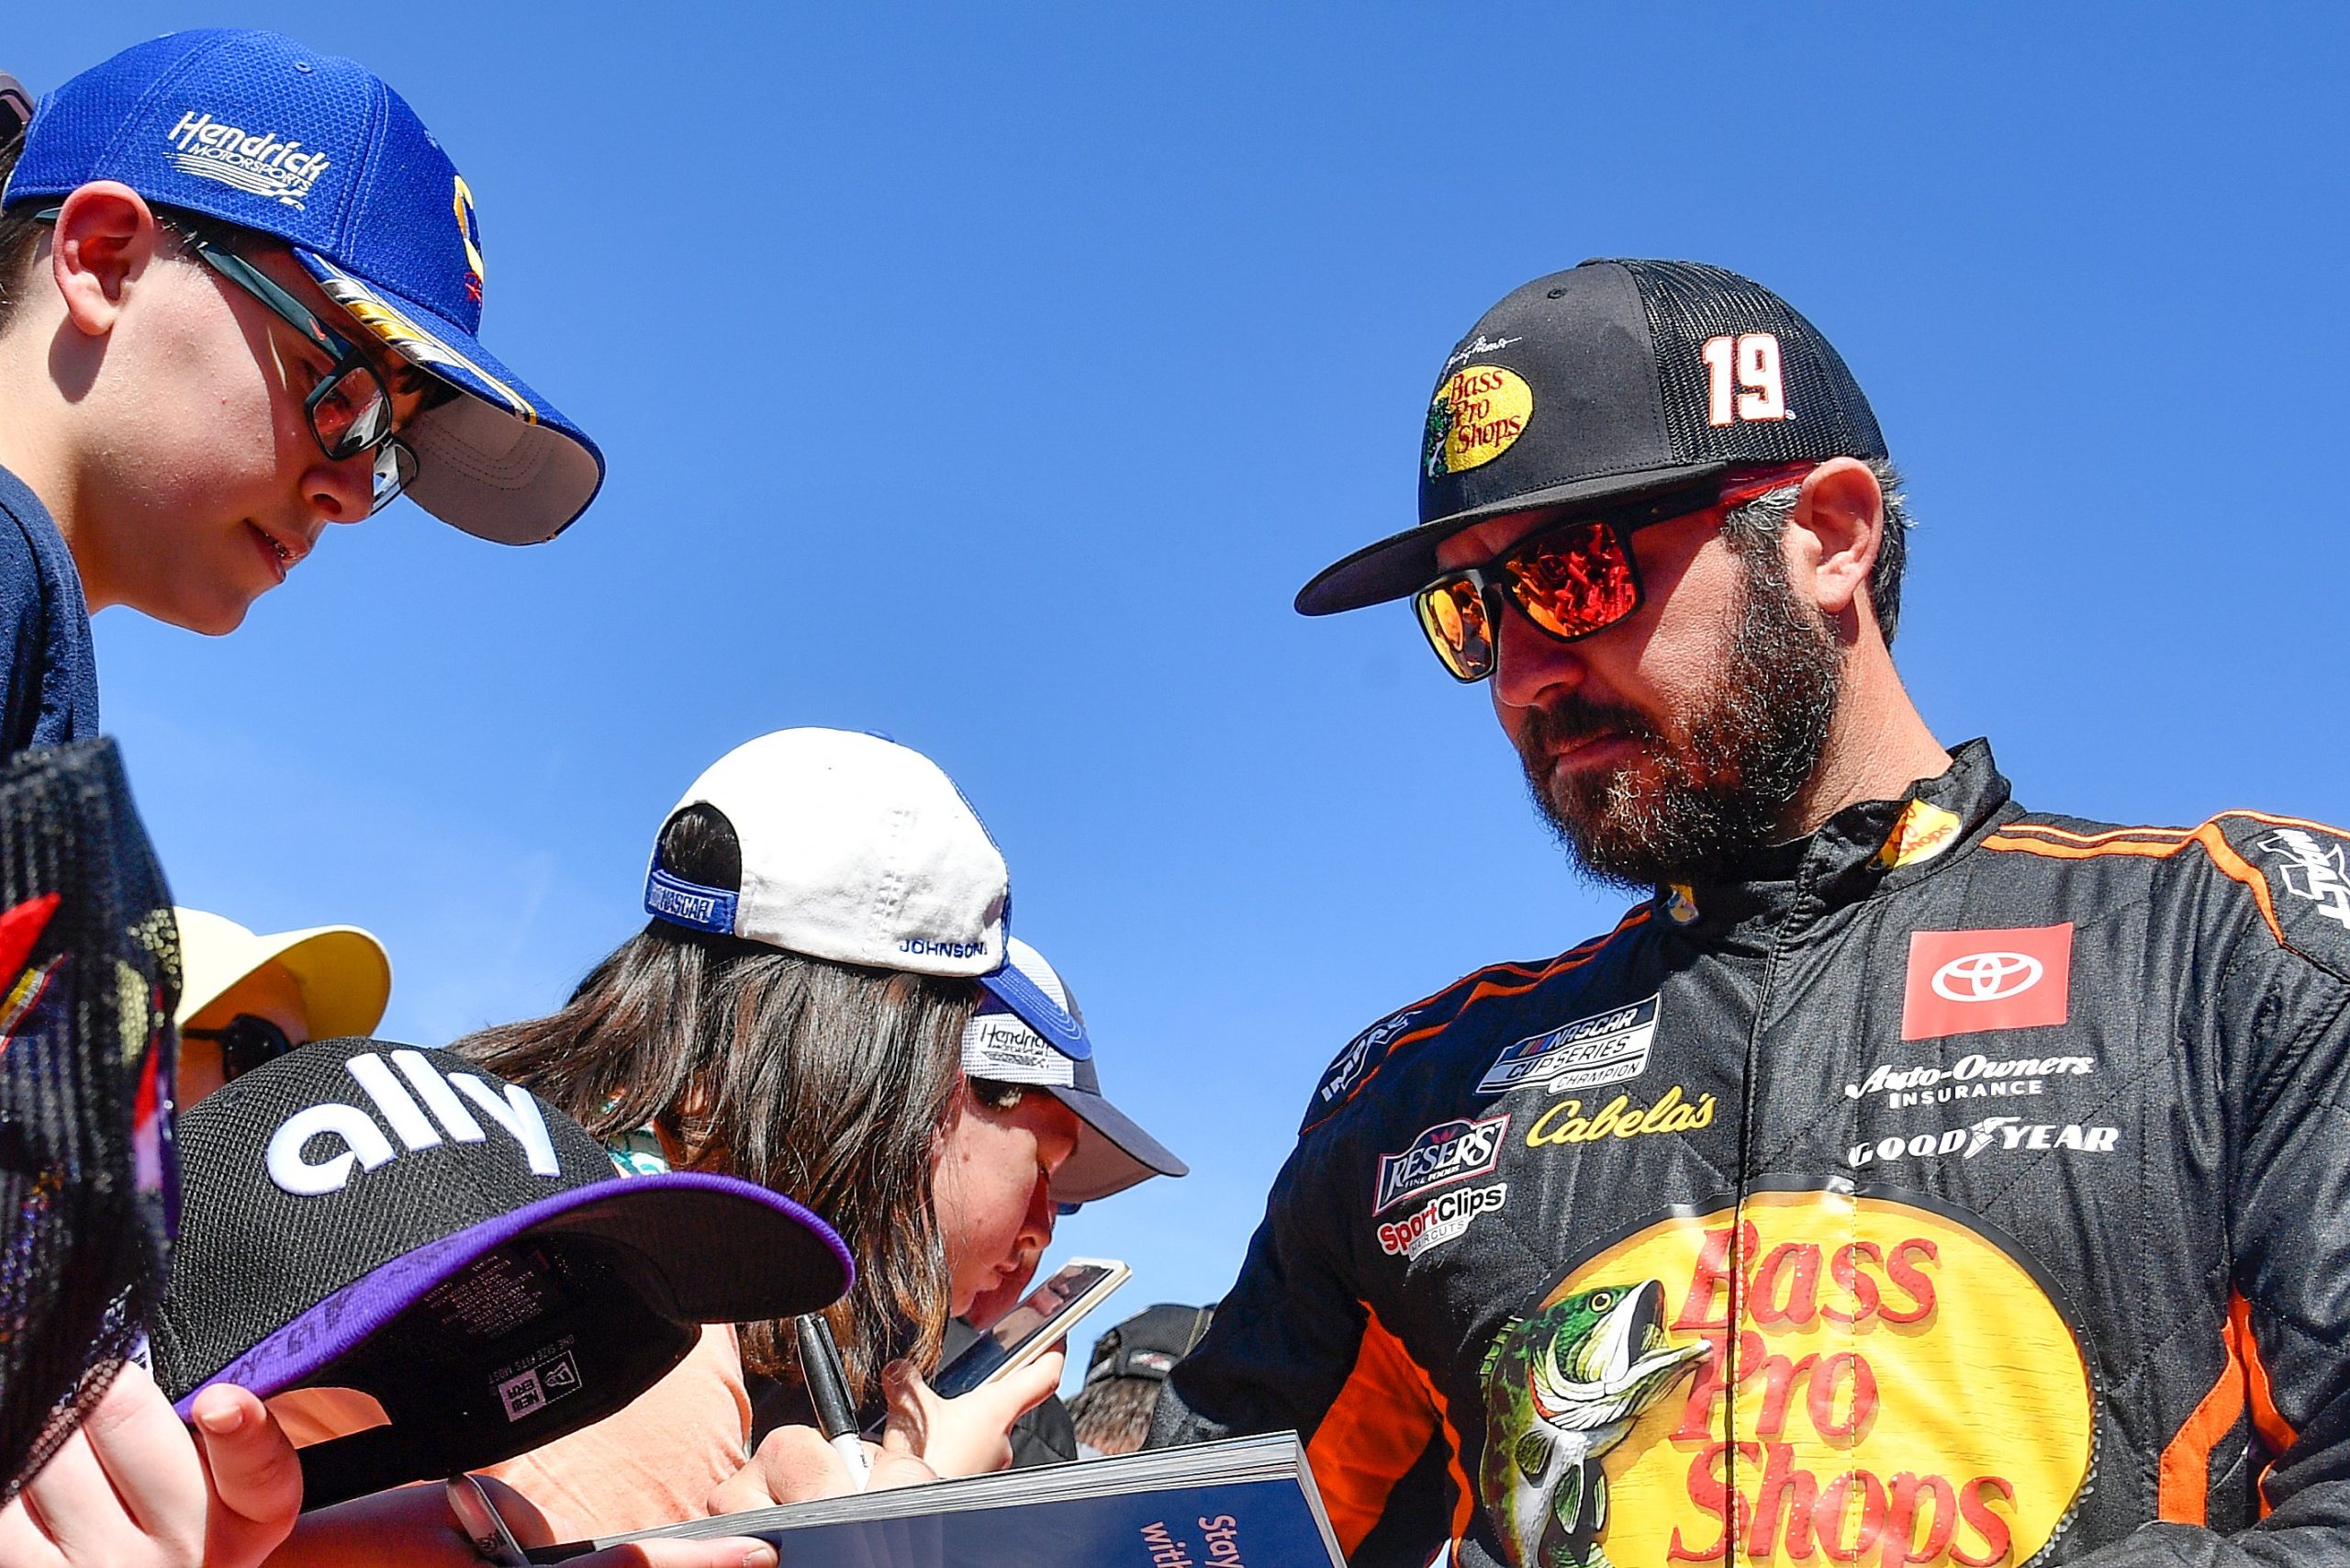 AVONDALE, ARIZONA - MARCH 13: Martin Truex Jr., driver of the #19 Bass Pro Shops Toyota, signs autographs for fans during the red carpet prior to the Ruoff Mortgage 500 during at Phoenix Raceway on March 13, 2022 in Avondale, Arizona. (Photo by Logan Riely/Getty Images)